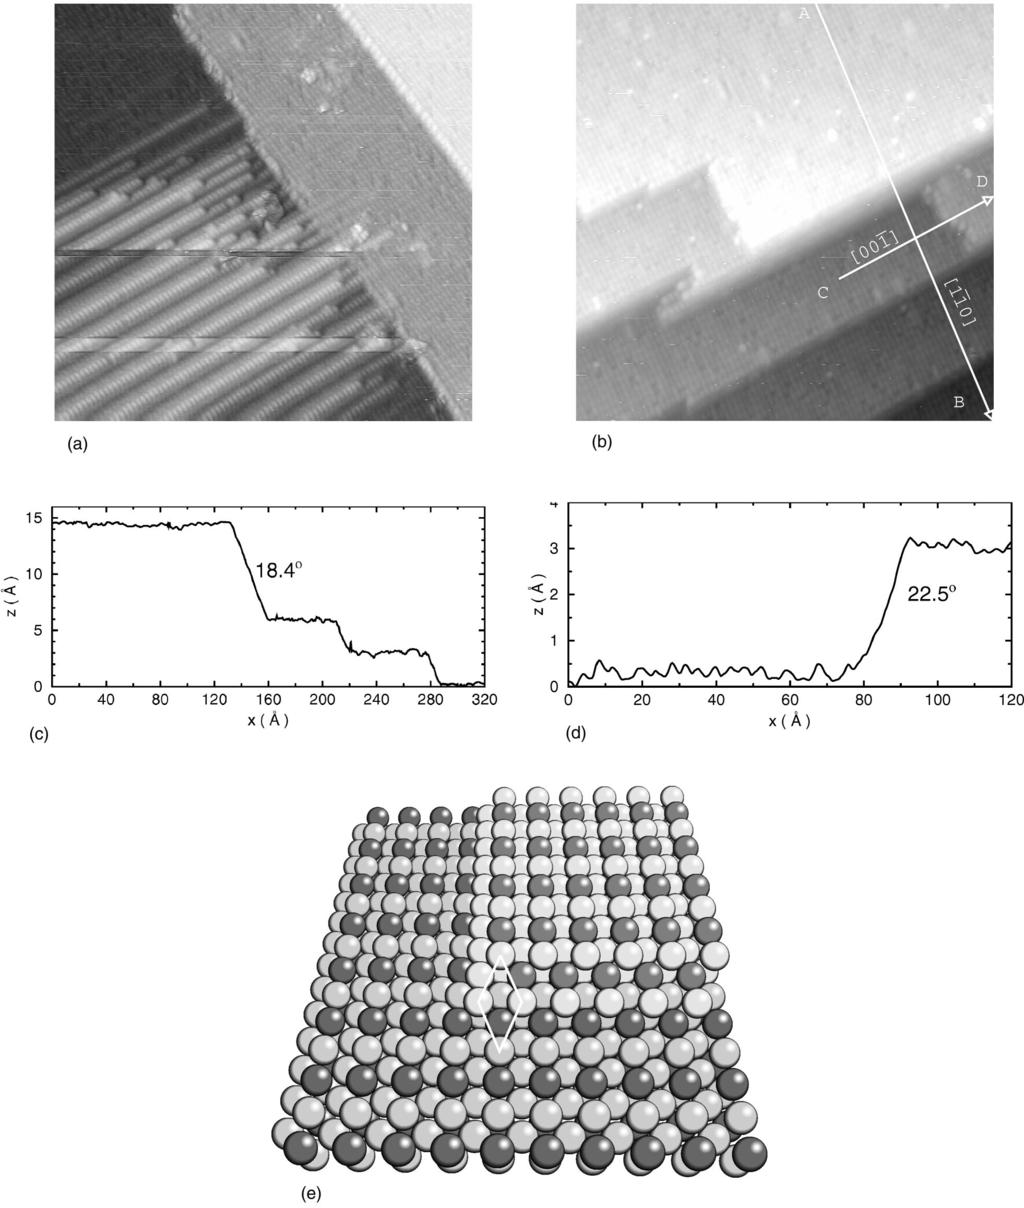 M. HOHEISEL et al. PHYSICAL REVIEW B 63 245403 FIG. 6. STM images of coexisting faceted structures and flat terraces, T anneal 920 K, 300 Å, 0.4 V, 0.8 na a, flat surface T anneal 920 K, 300 Å, 0.